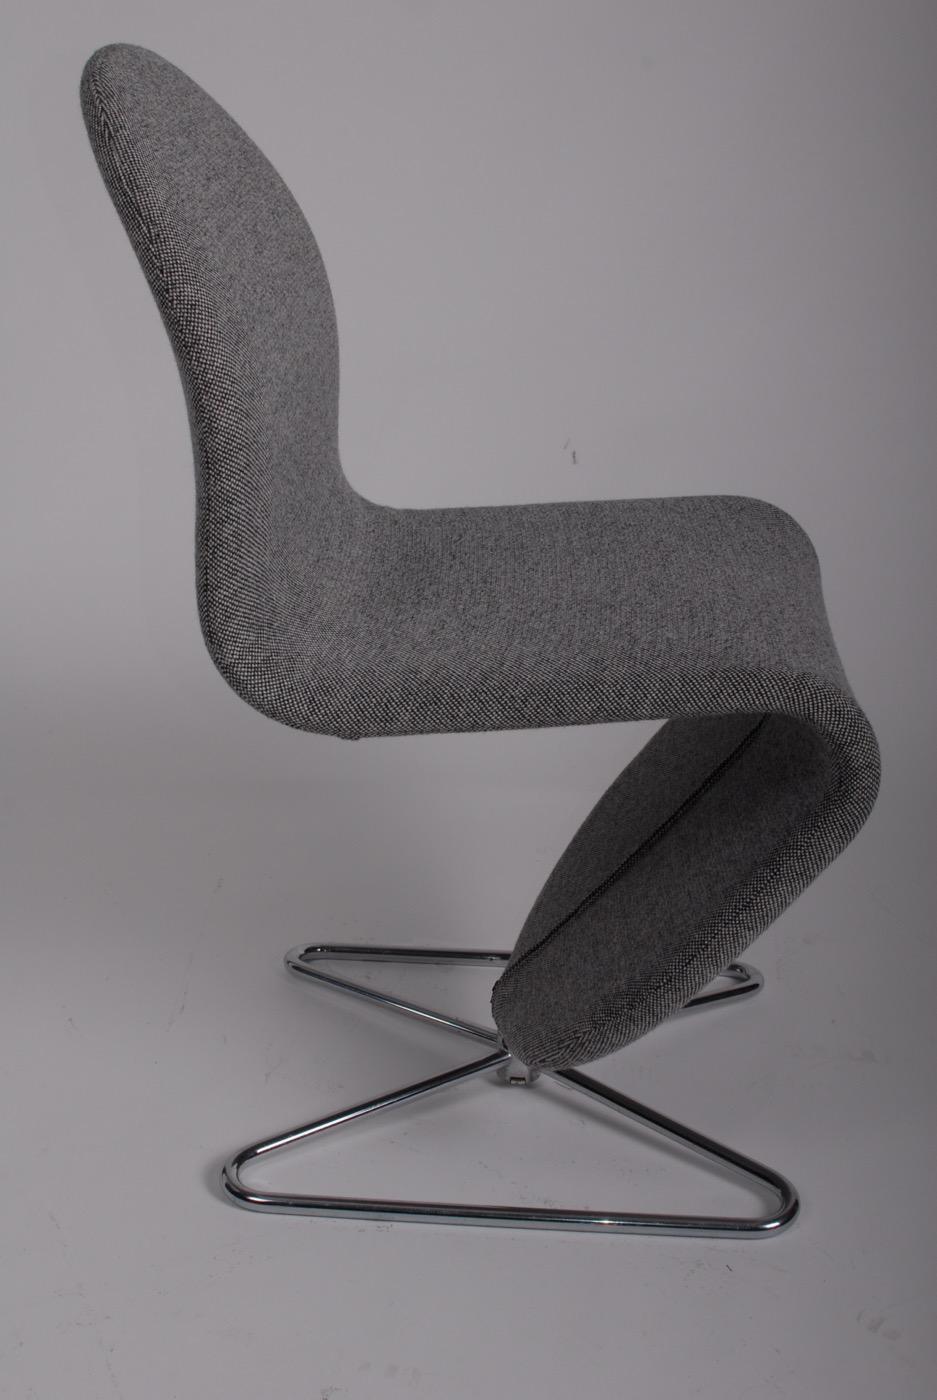 Steel Space Age Verner Panton Set of Four Chairs 123 Serie Fritz Hansen Wool Fabric